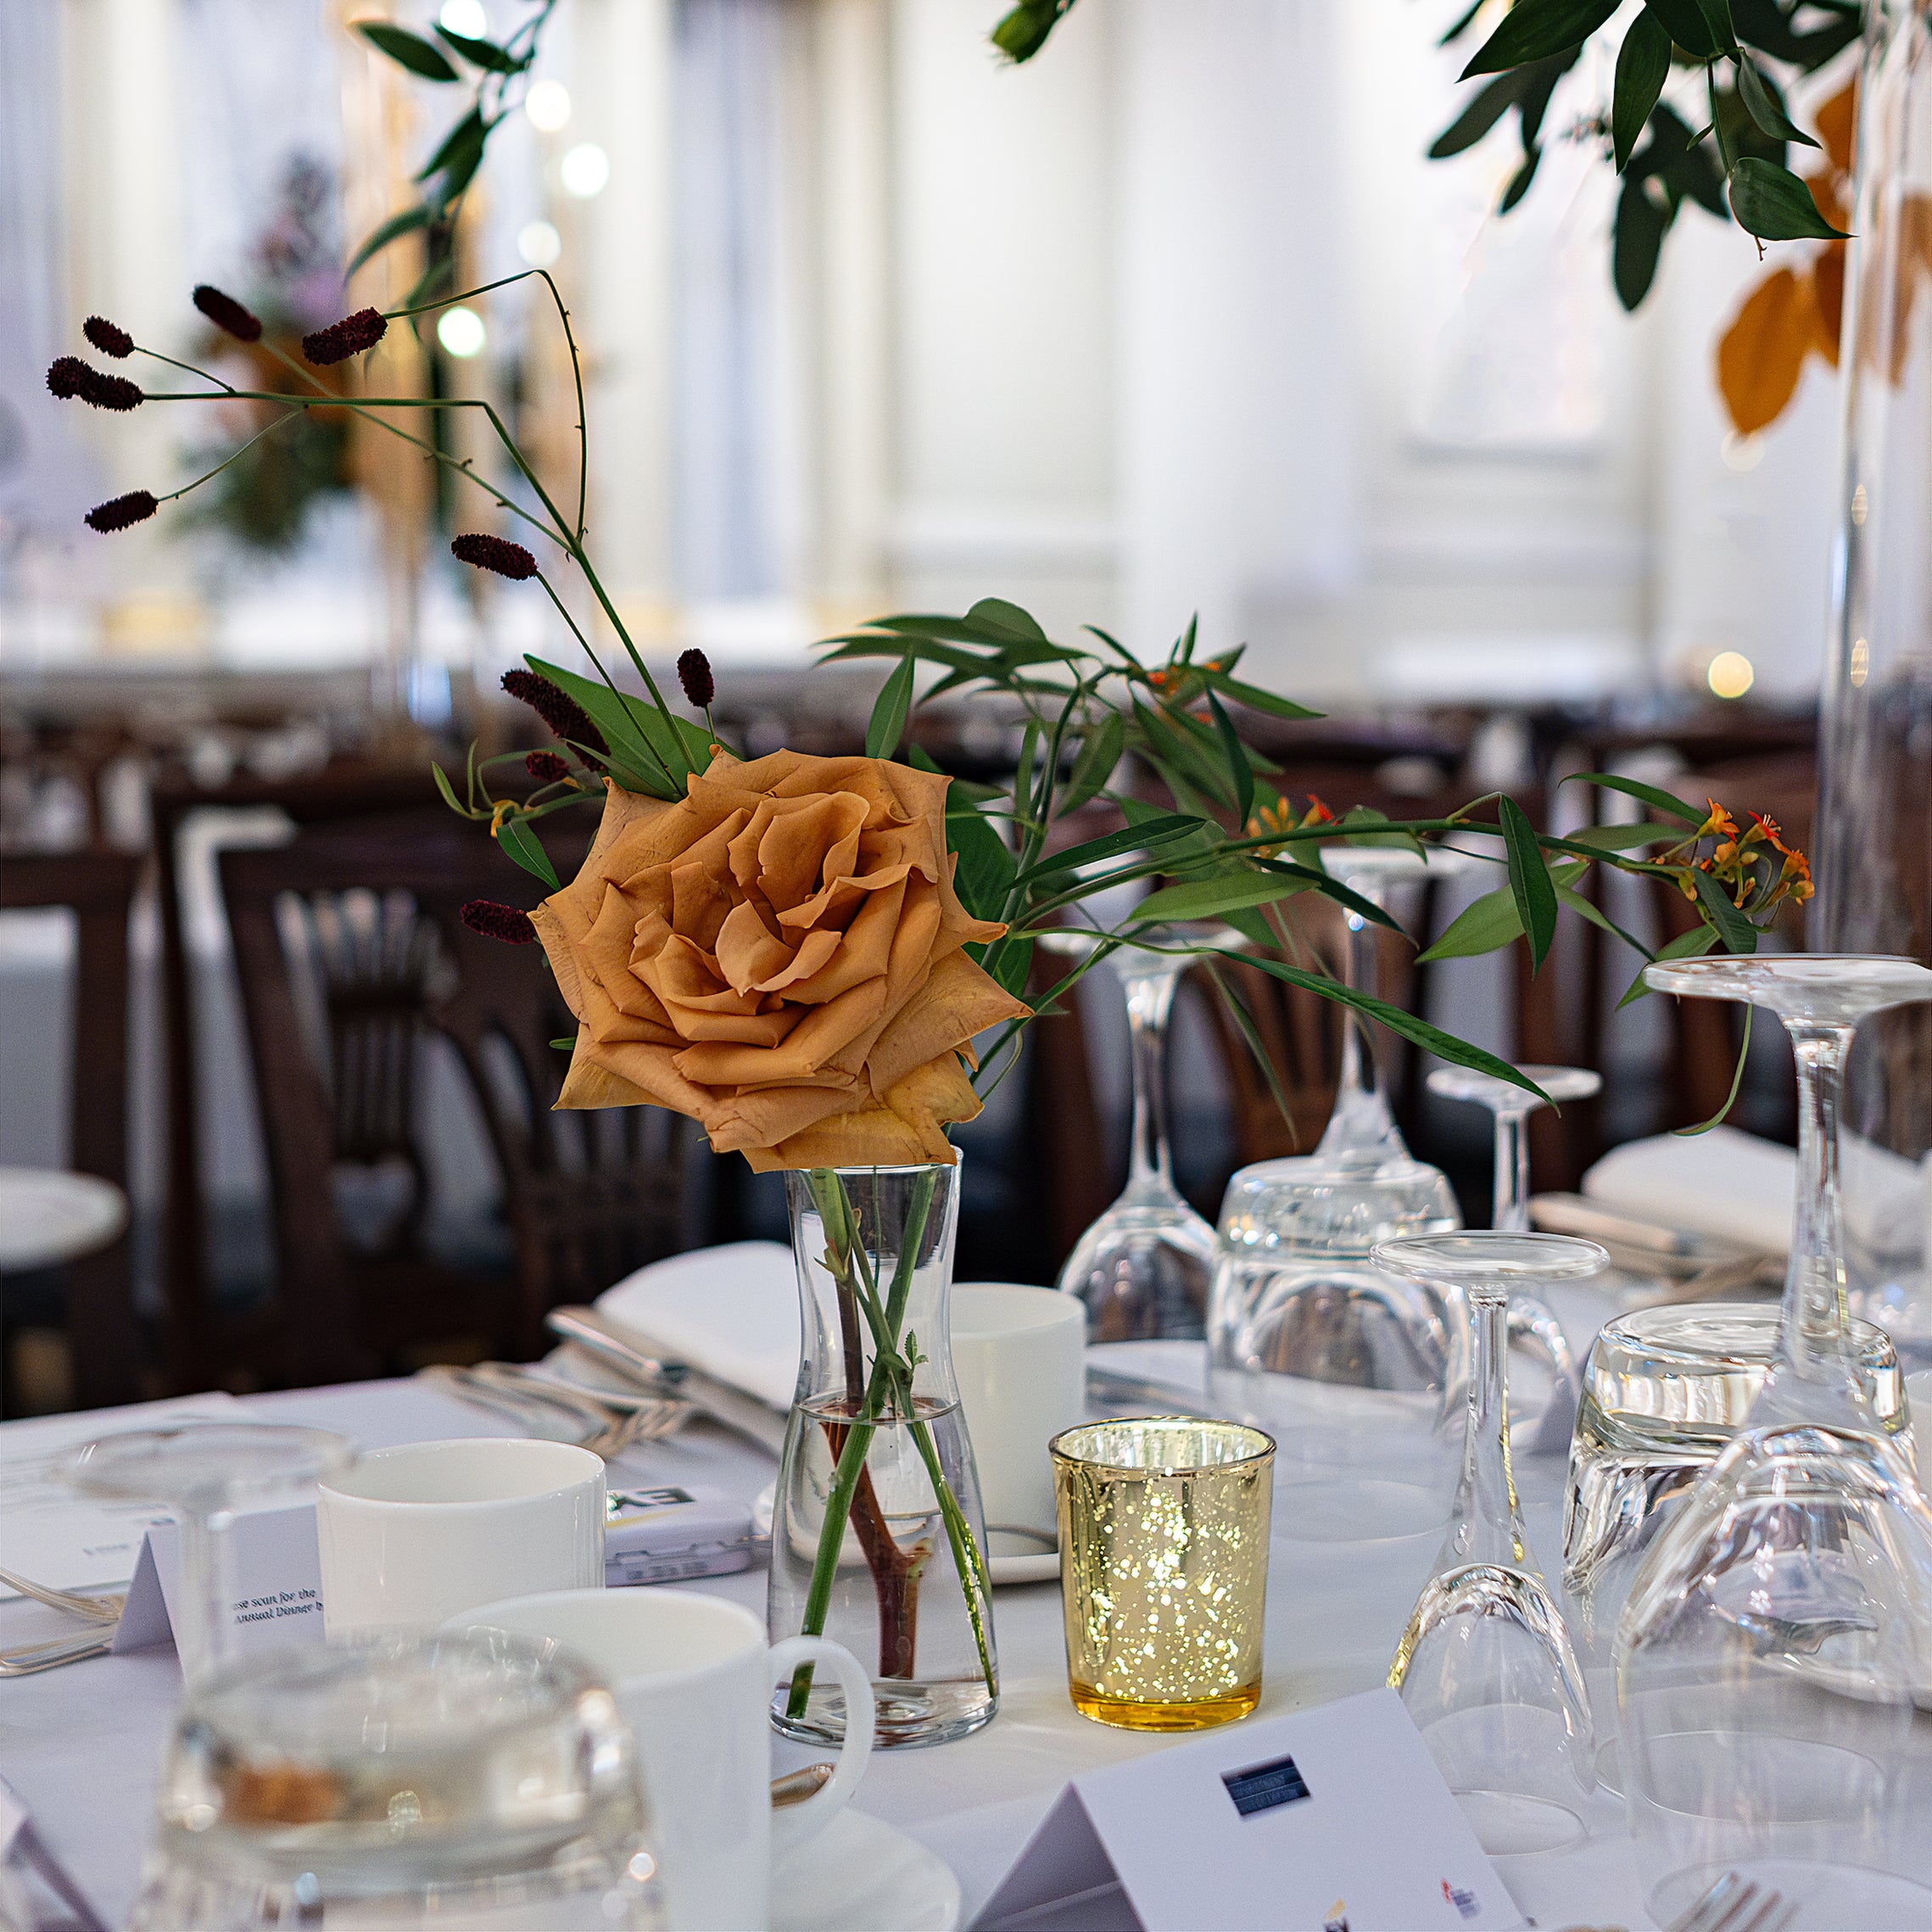 A single rose in jar placed on a large dining table